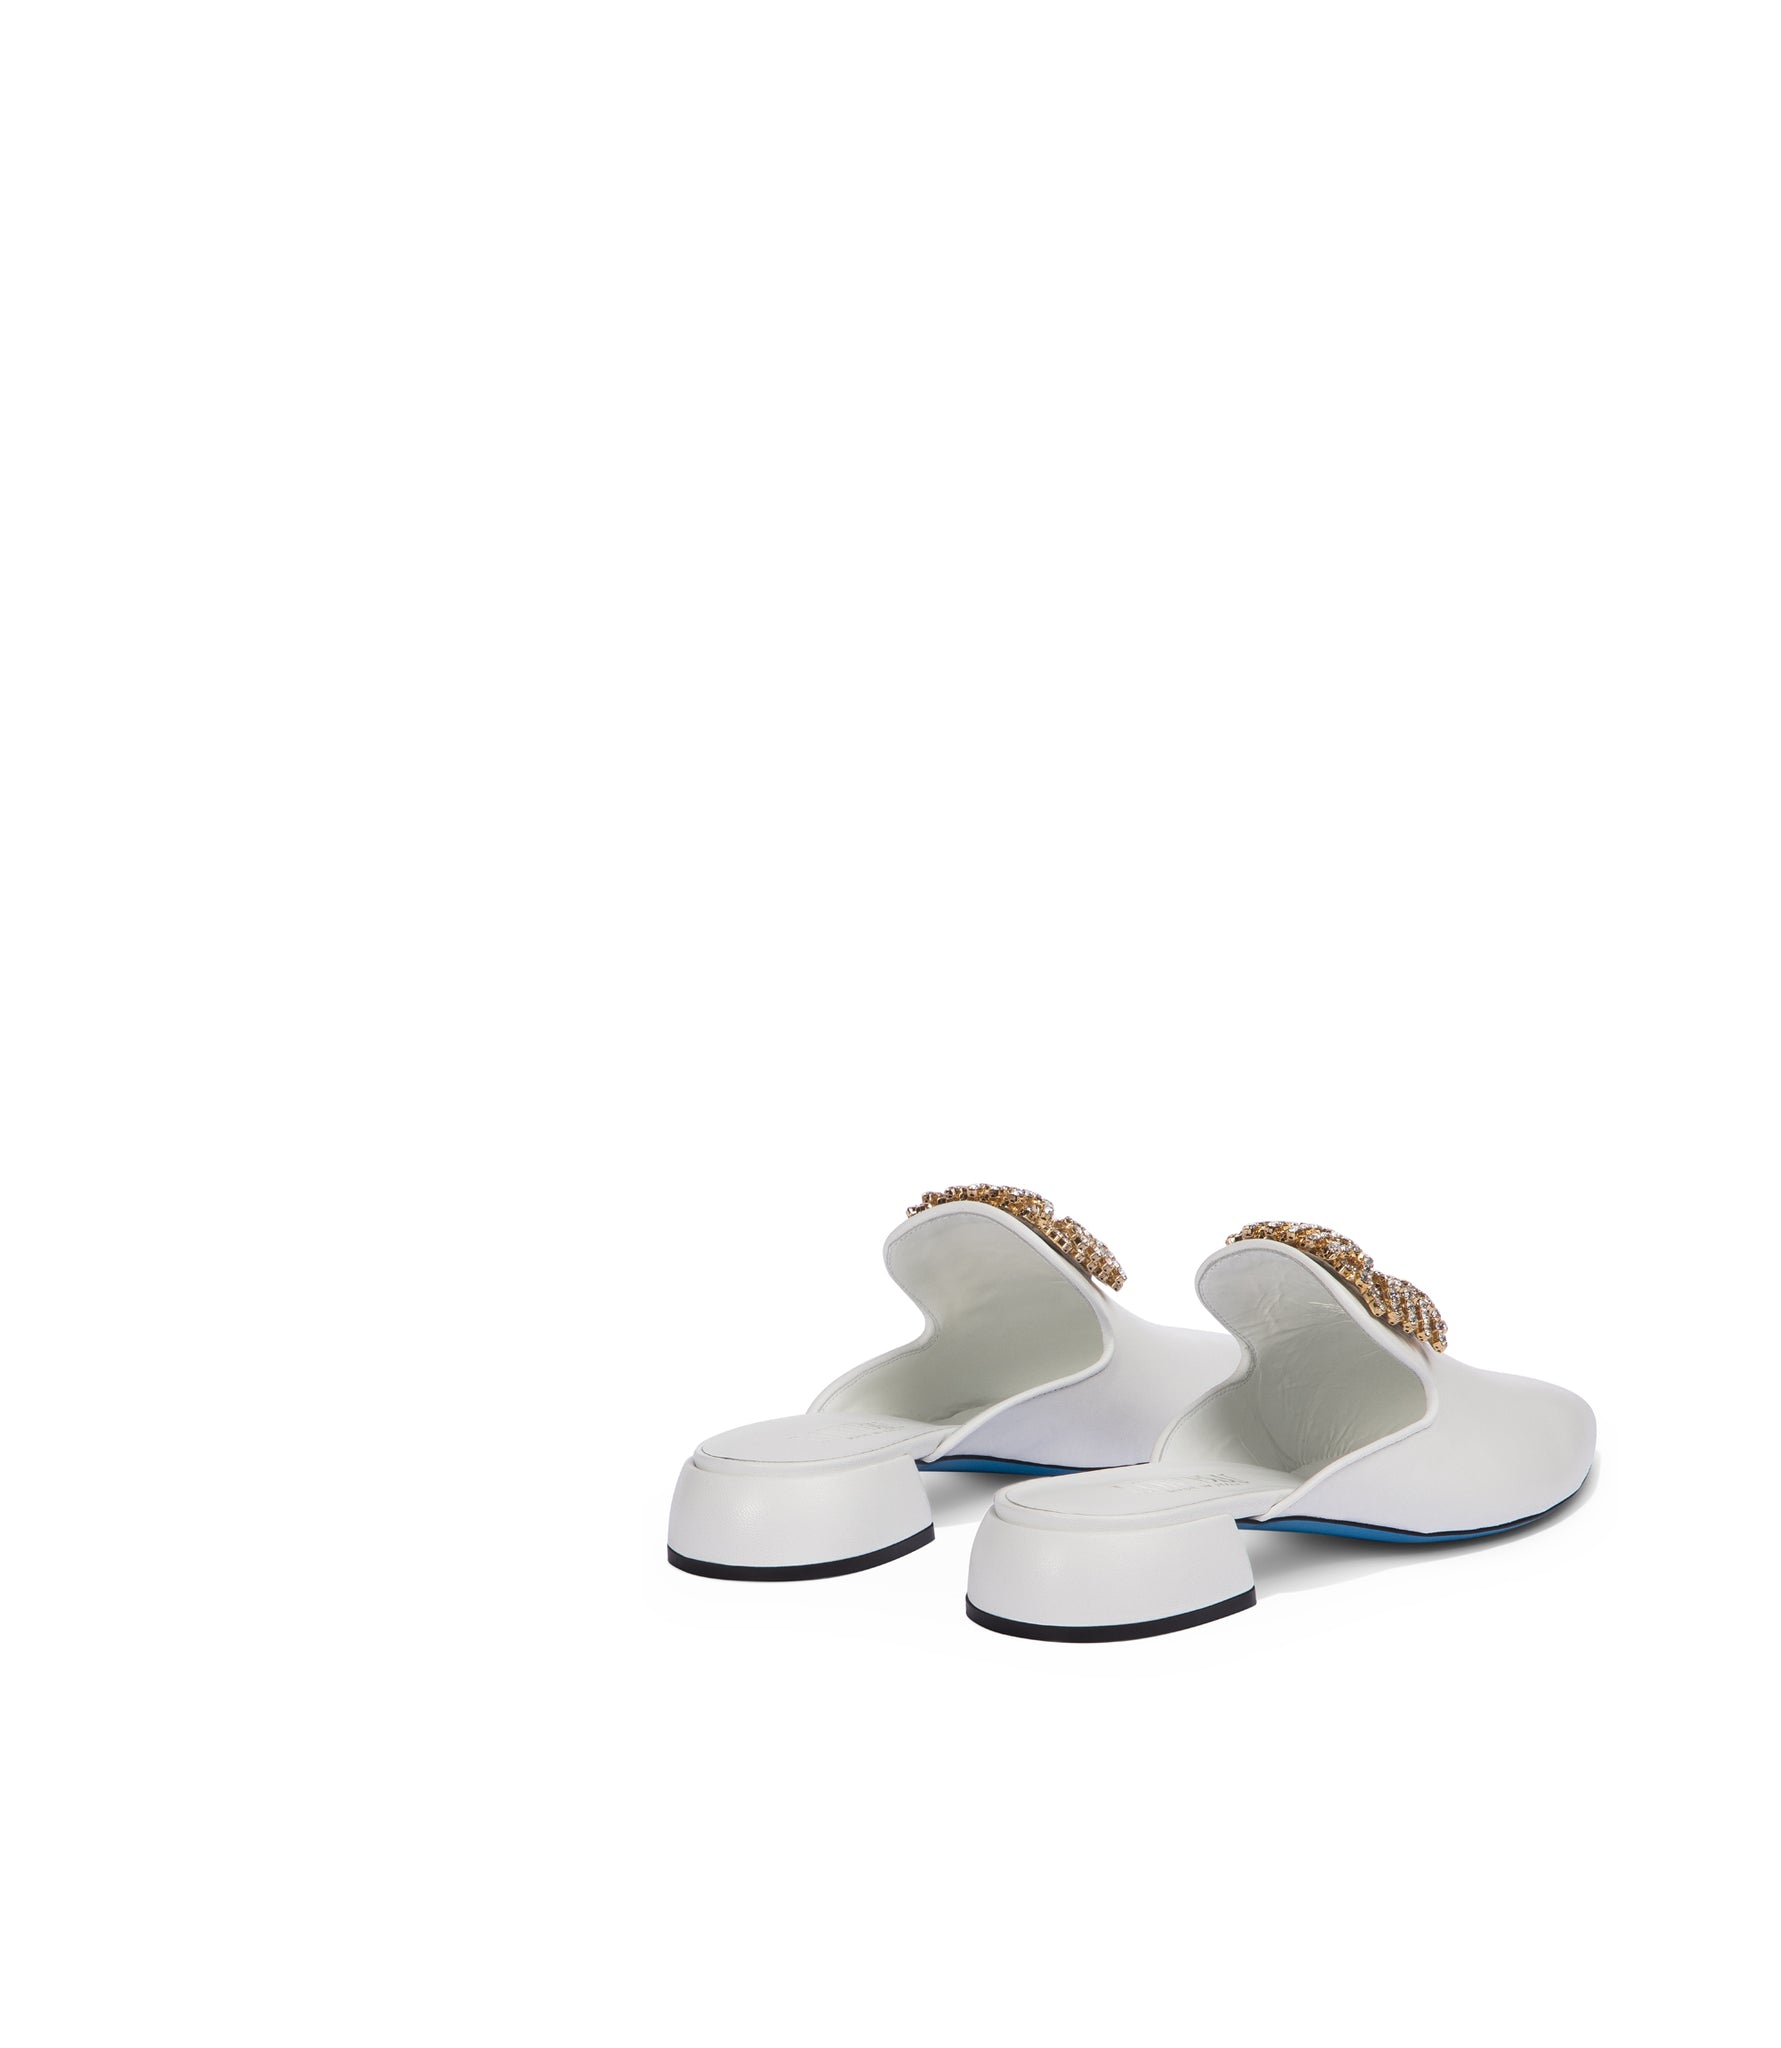 Jewel-buckle white nappa leather mules